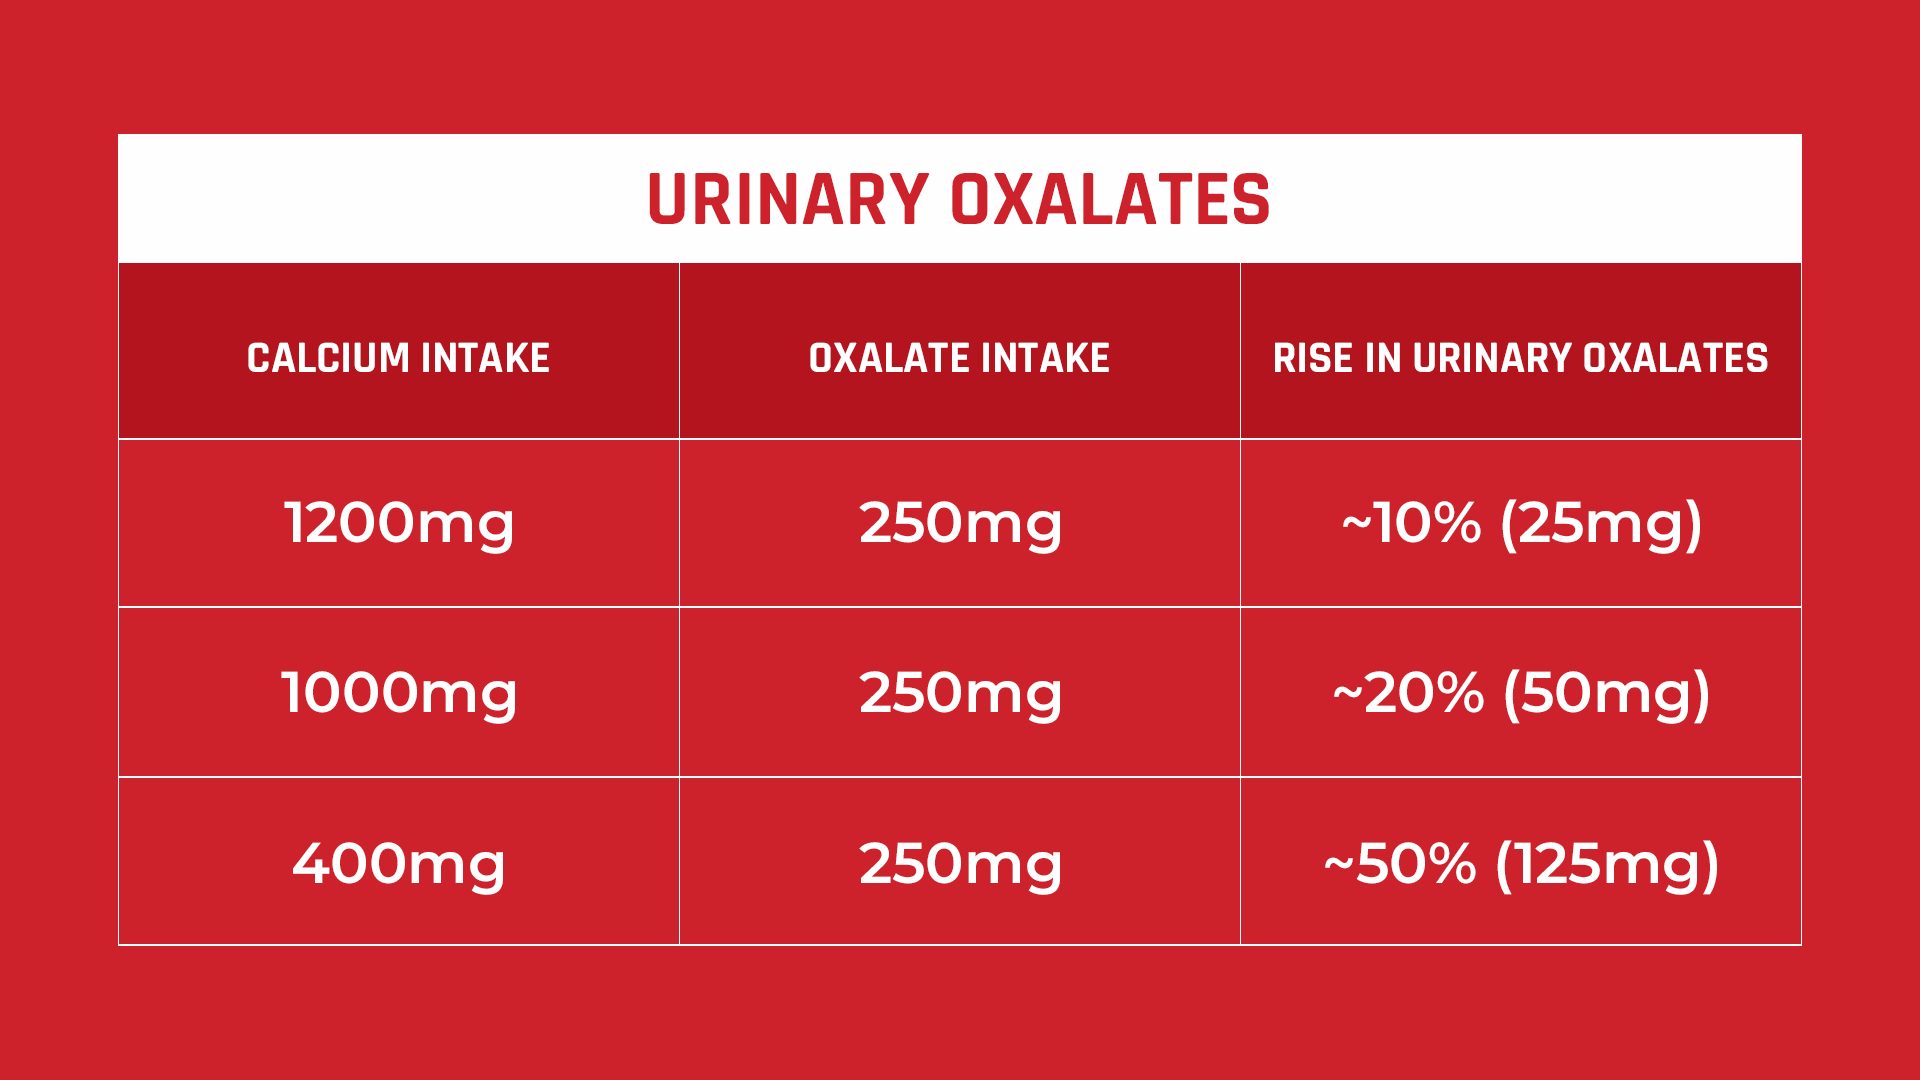 Chart showing rise in urinary oxalates depending on calcium intake